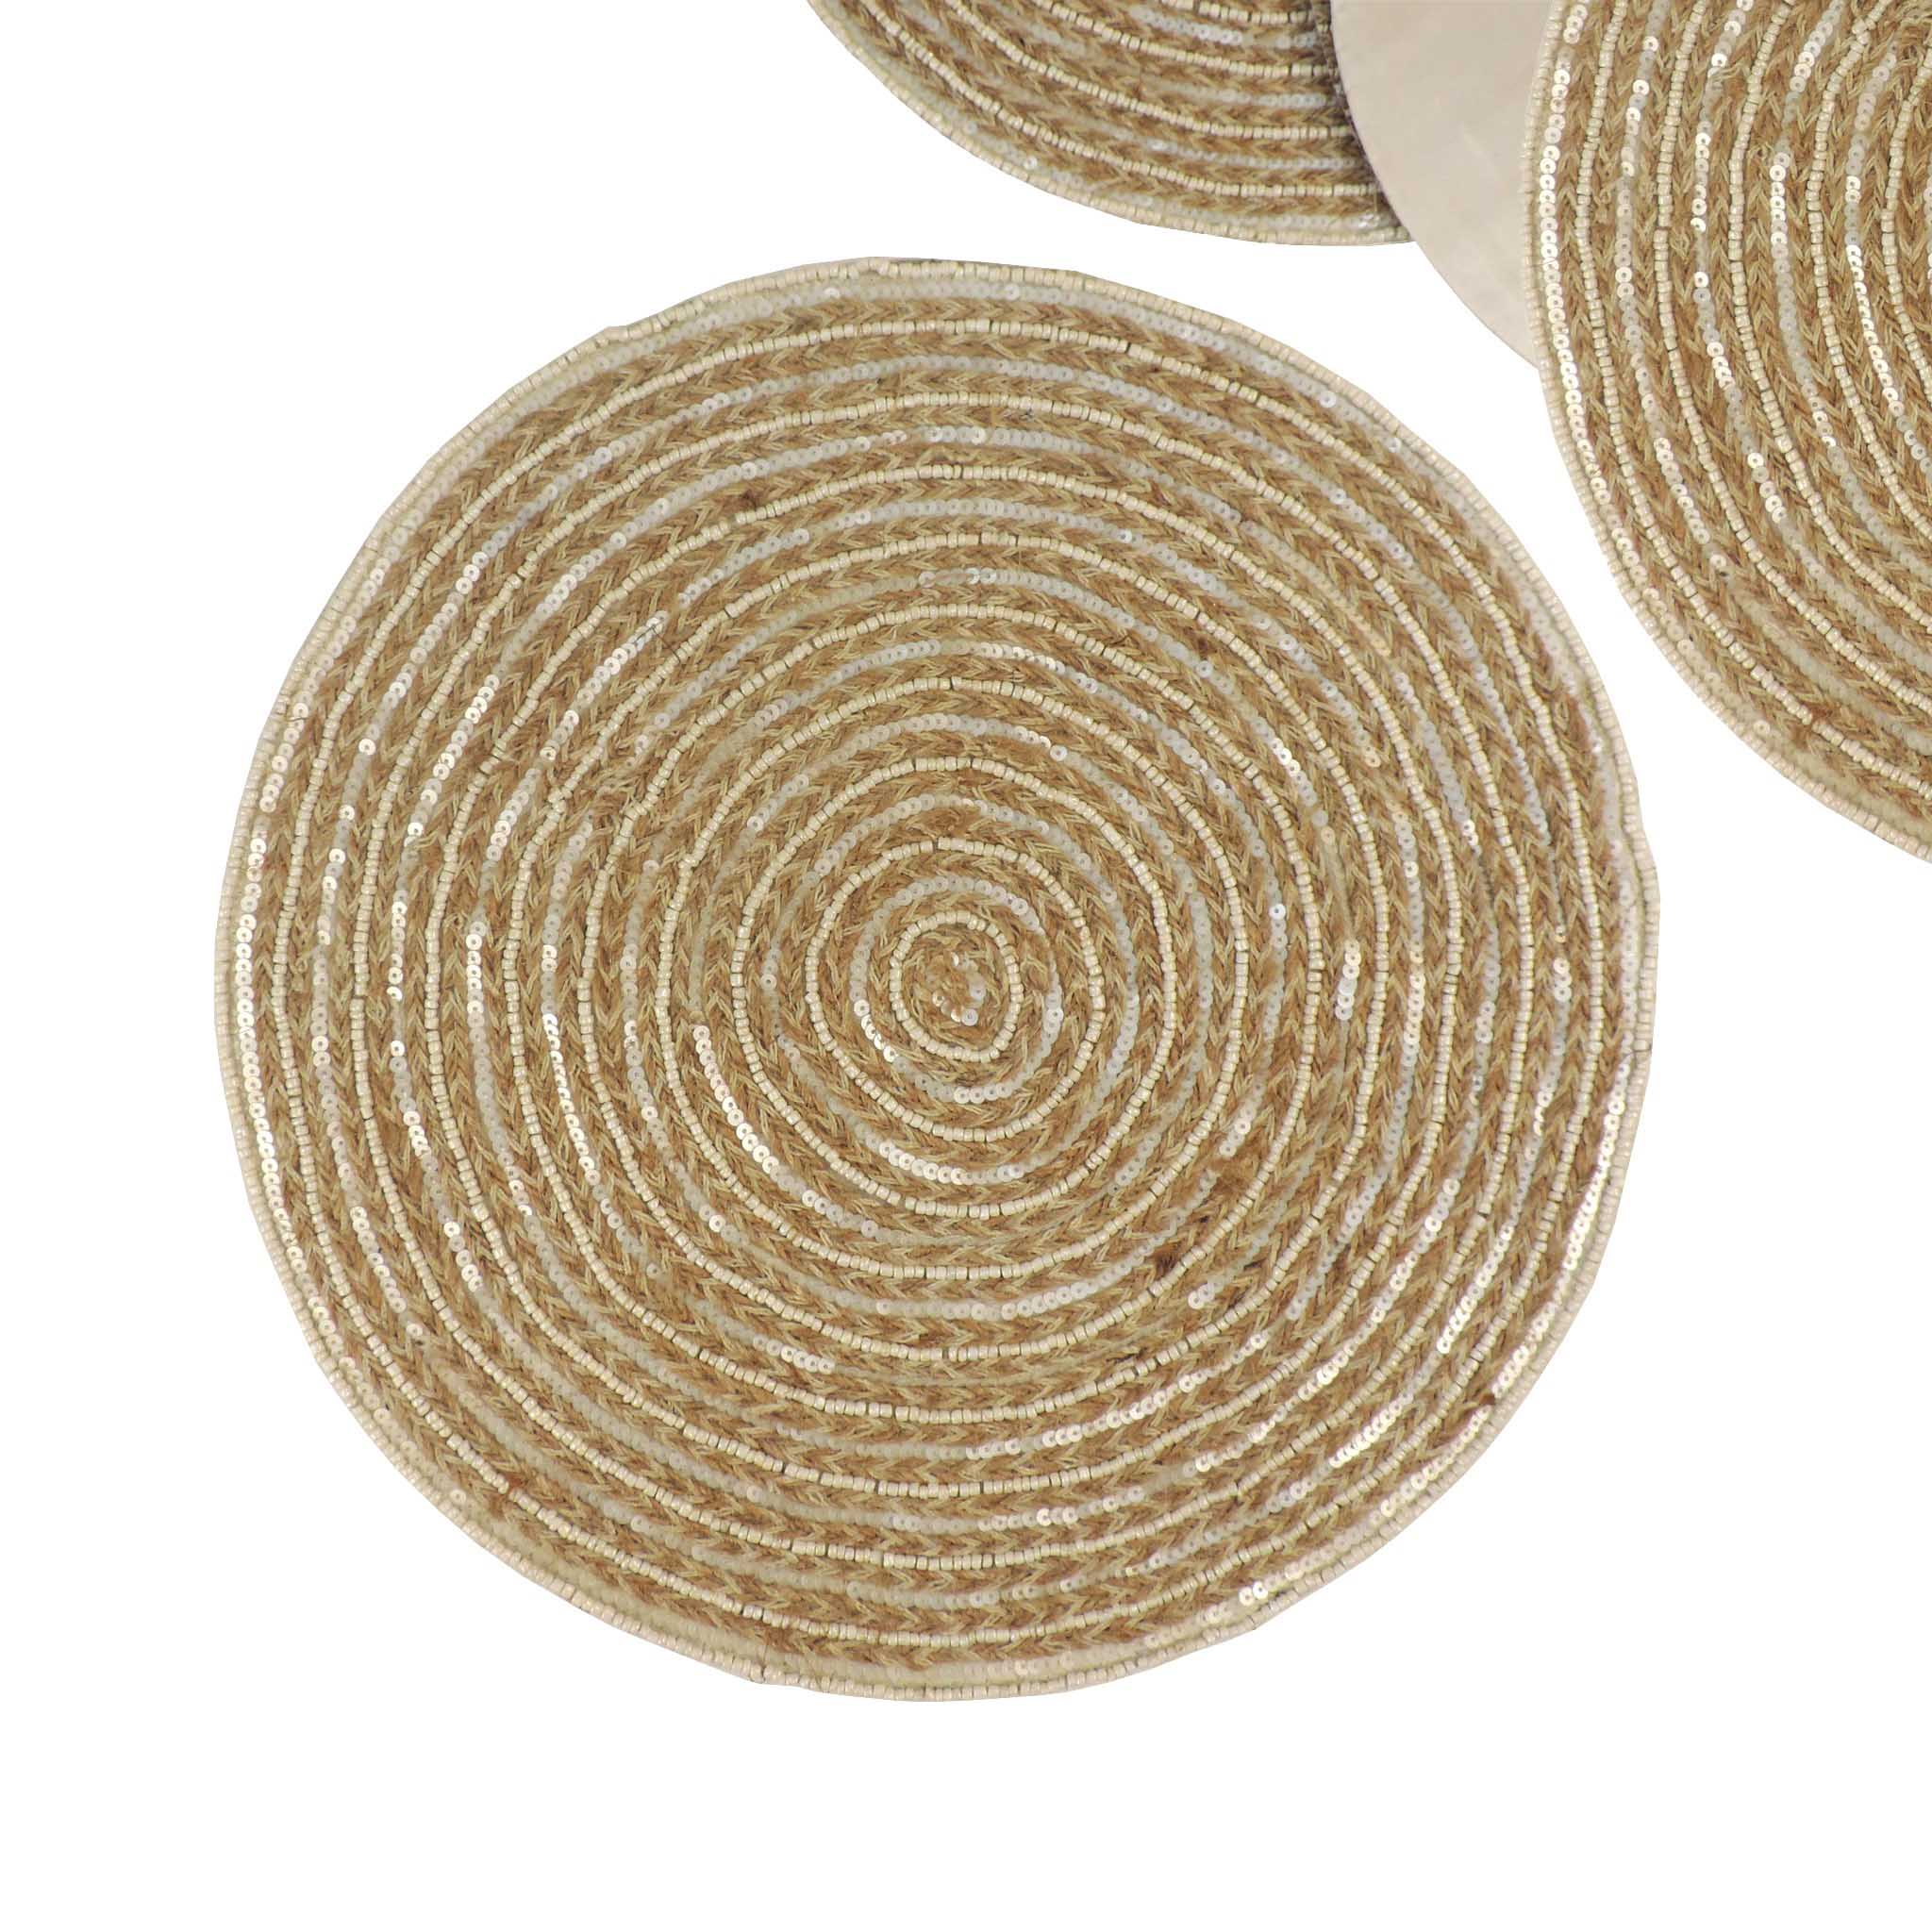 Jute Embroidered Placemat in Beige, Set of 2/4